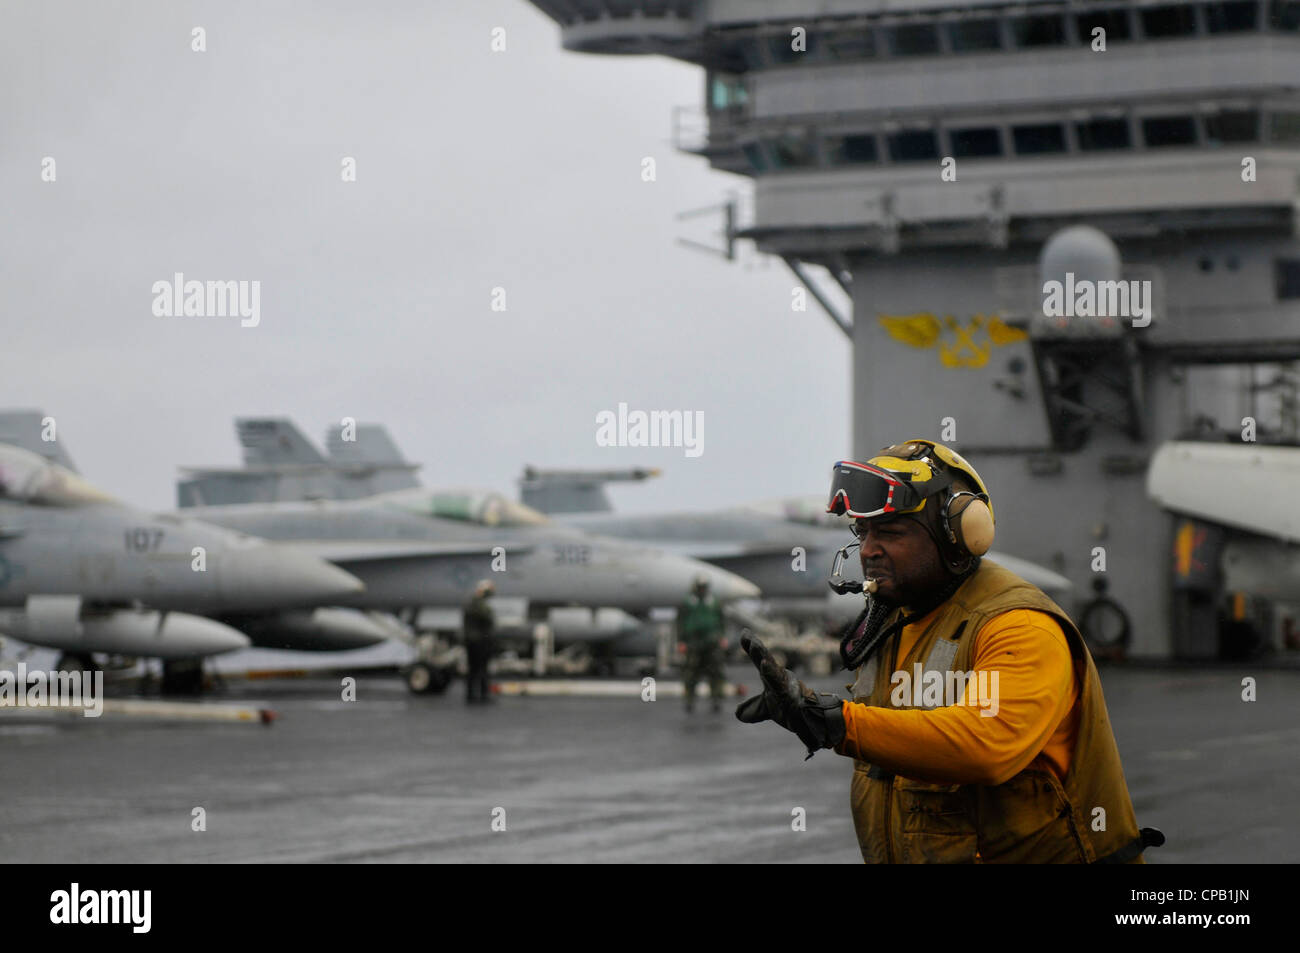 Aviation BoatswainÕs Mate (Handling) 2nd Class Dwayne Foster directs aircraft on the flight deck during foul weather aboard the Nimitz-class aircraft carrier USS Carl Vinson (CVN 70). Carl Vinson and Carrier Air Wing (CVW) 17 are deployed to the U.S. 7th Fleet area of operations. Stock Photo